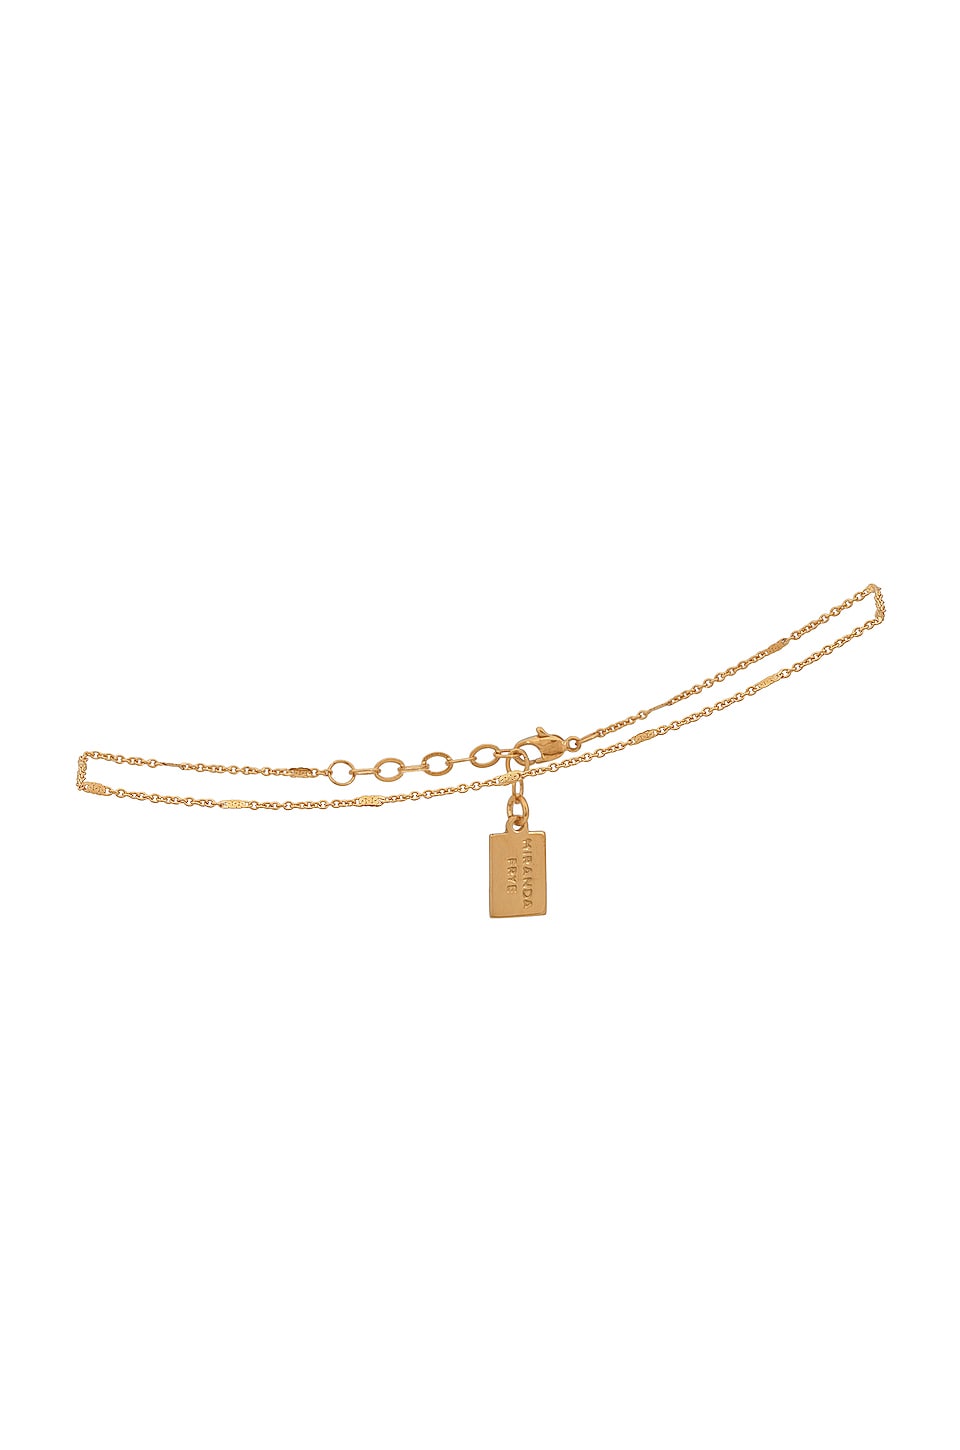 Lili Claspe Reggie Thick Anklet in Gold